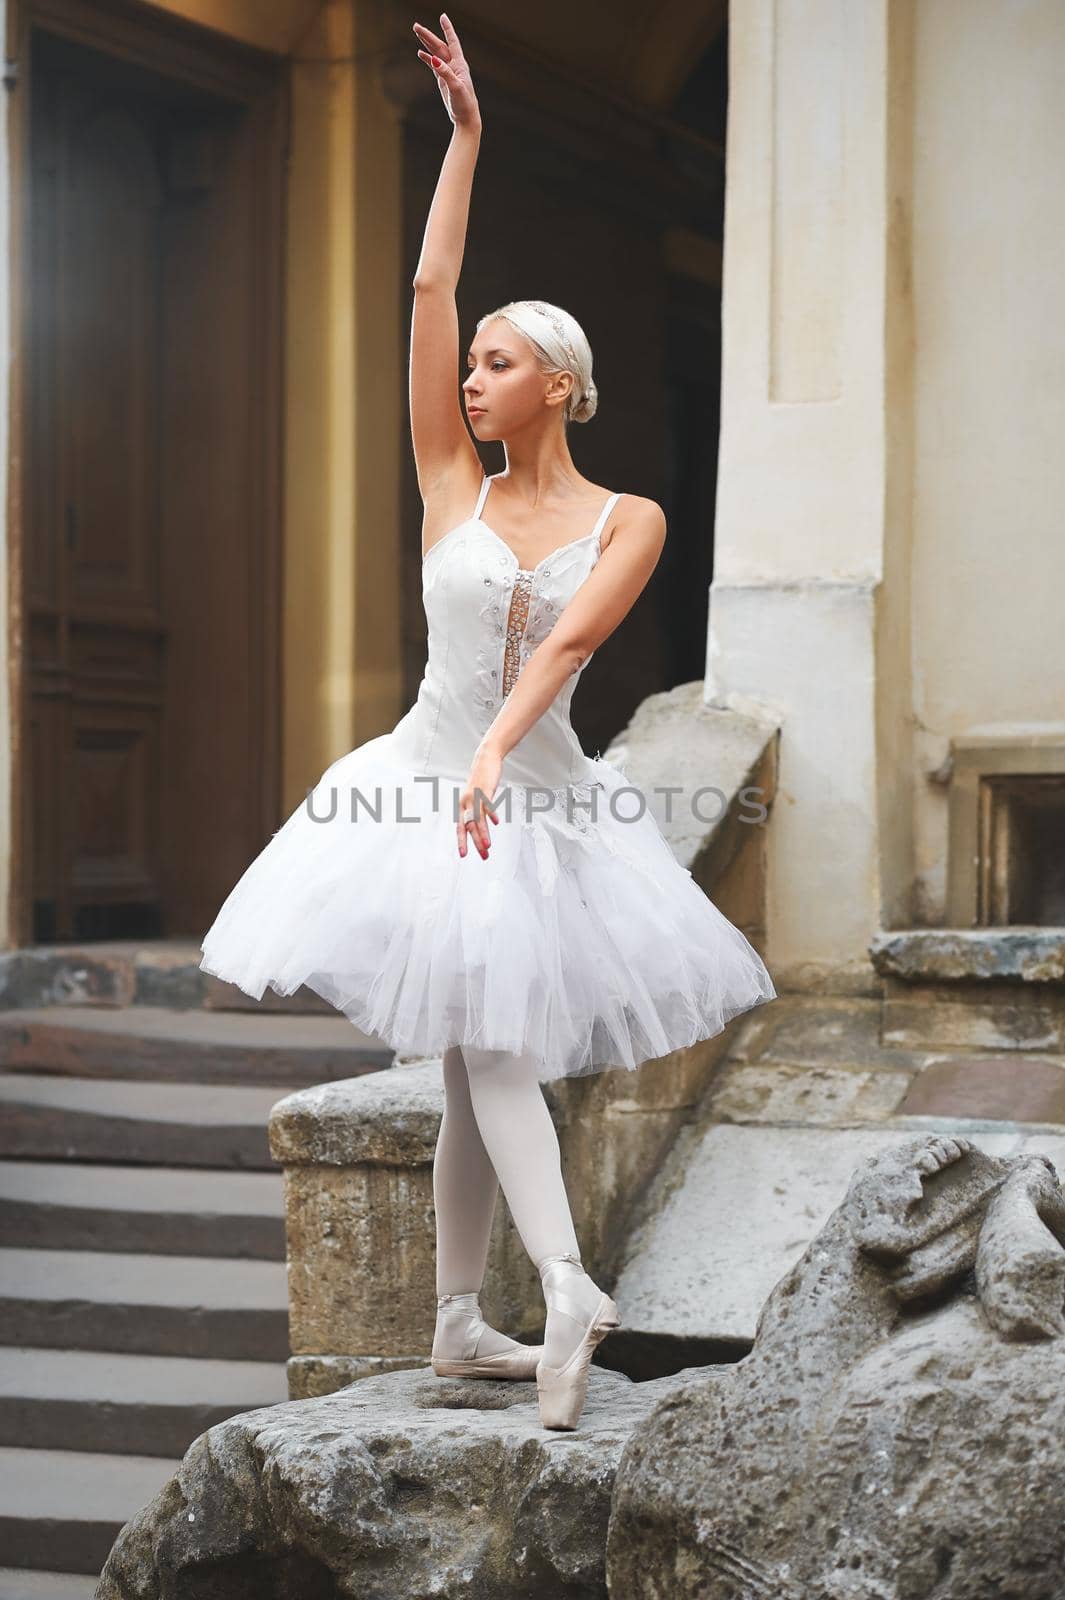 Sunning beautiful ballerina posing gracefully on a big stone near an old building outdoors.